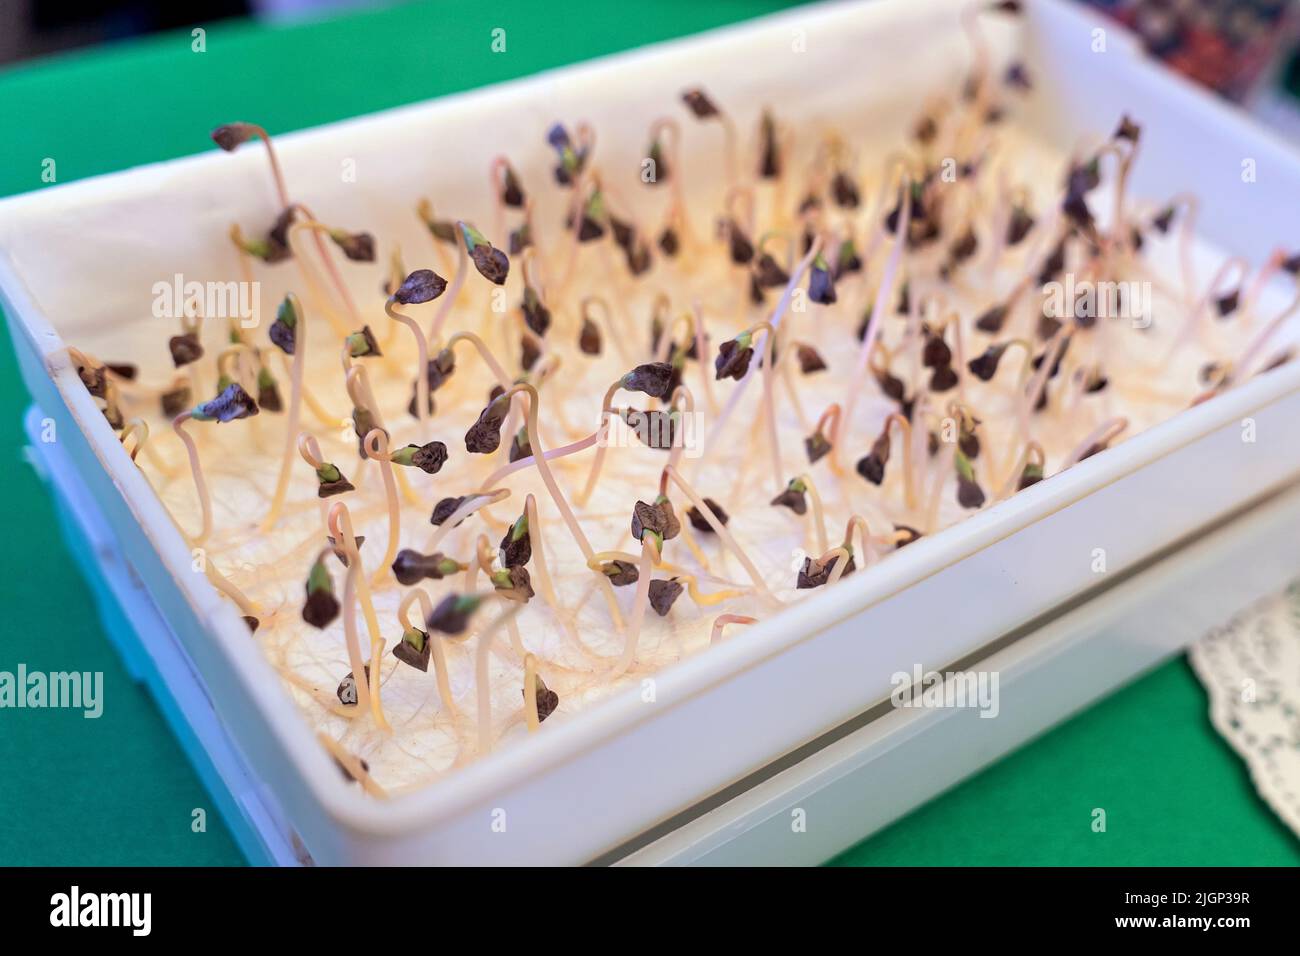 Planting seeds different seeds on wet wipes. laboratory work, study of plant growth at home Stock Photo